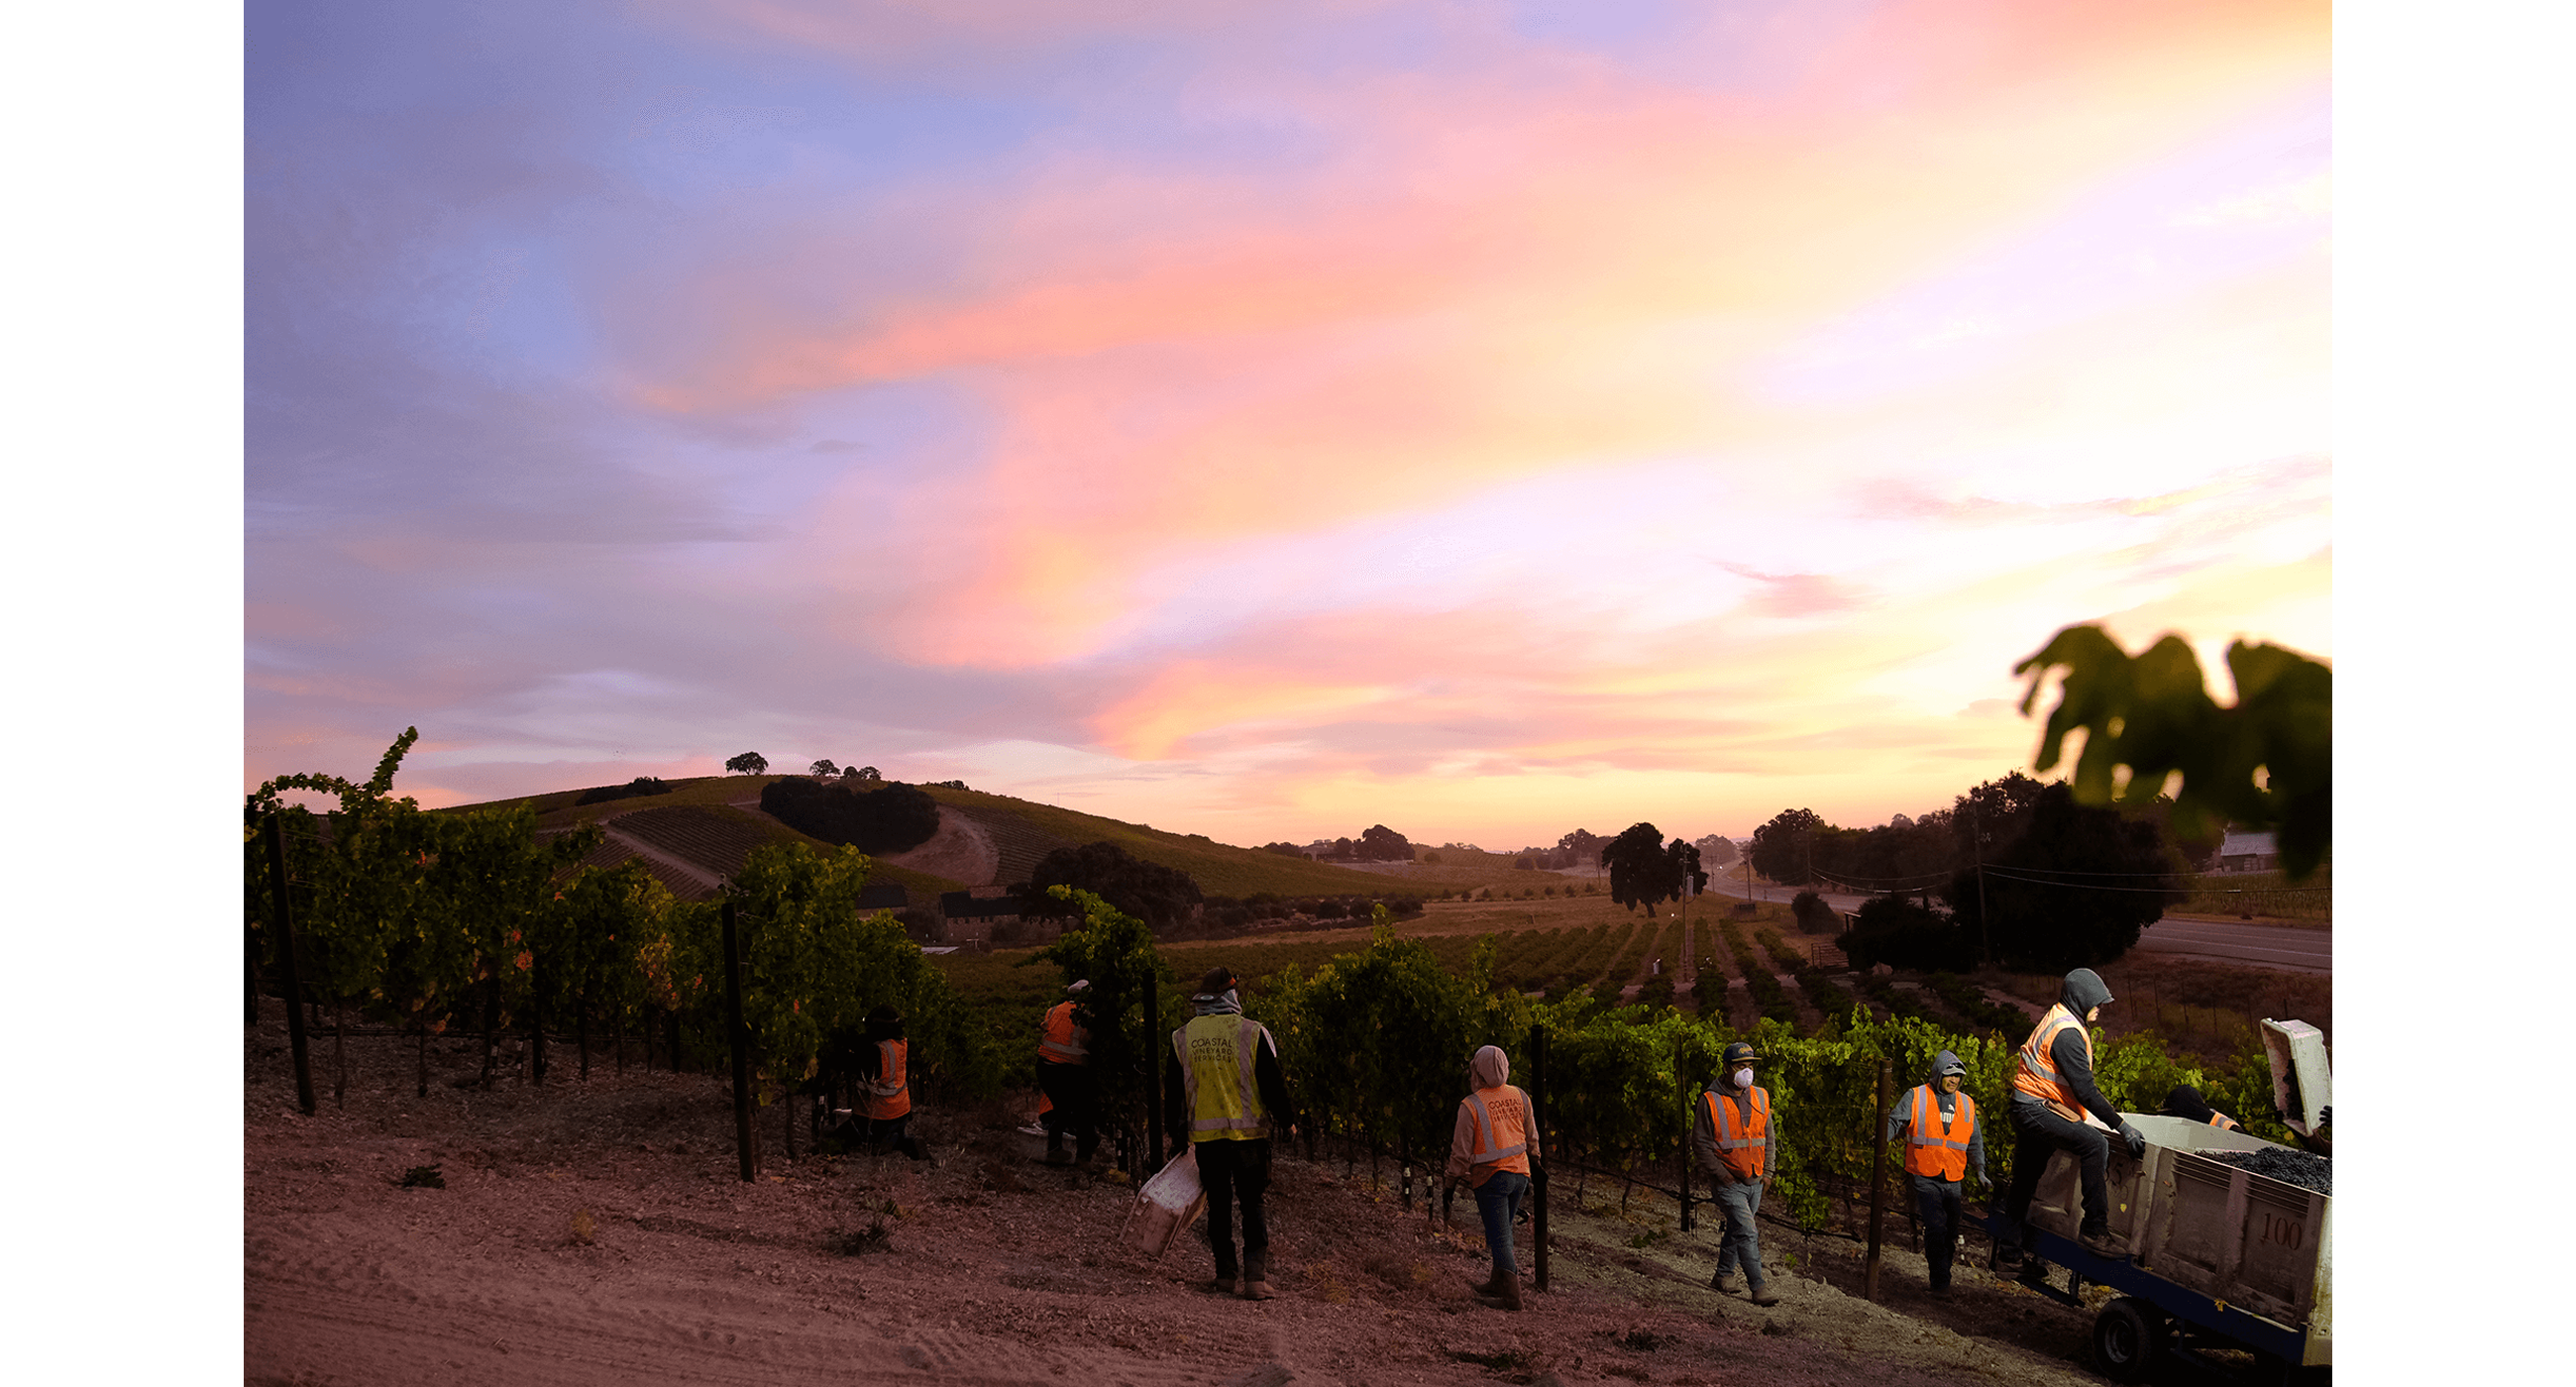 A brilliant sunrise with pink, blue and yellow clouds is shown over workers in a vineyard, getting ready to harvest grapes.